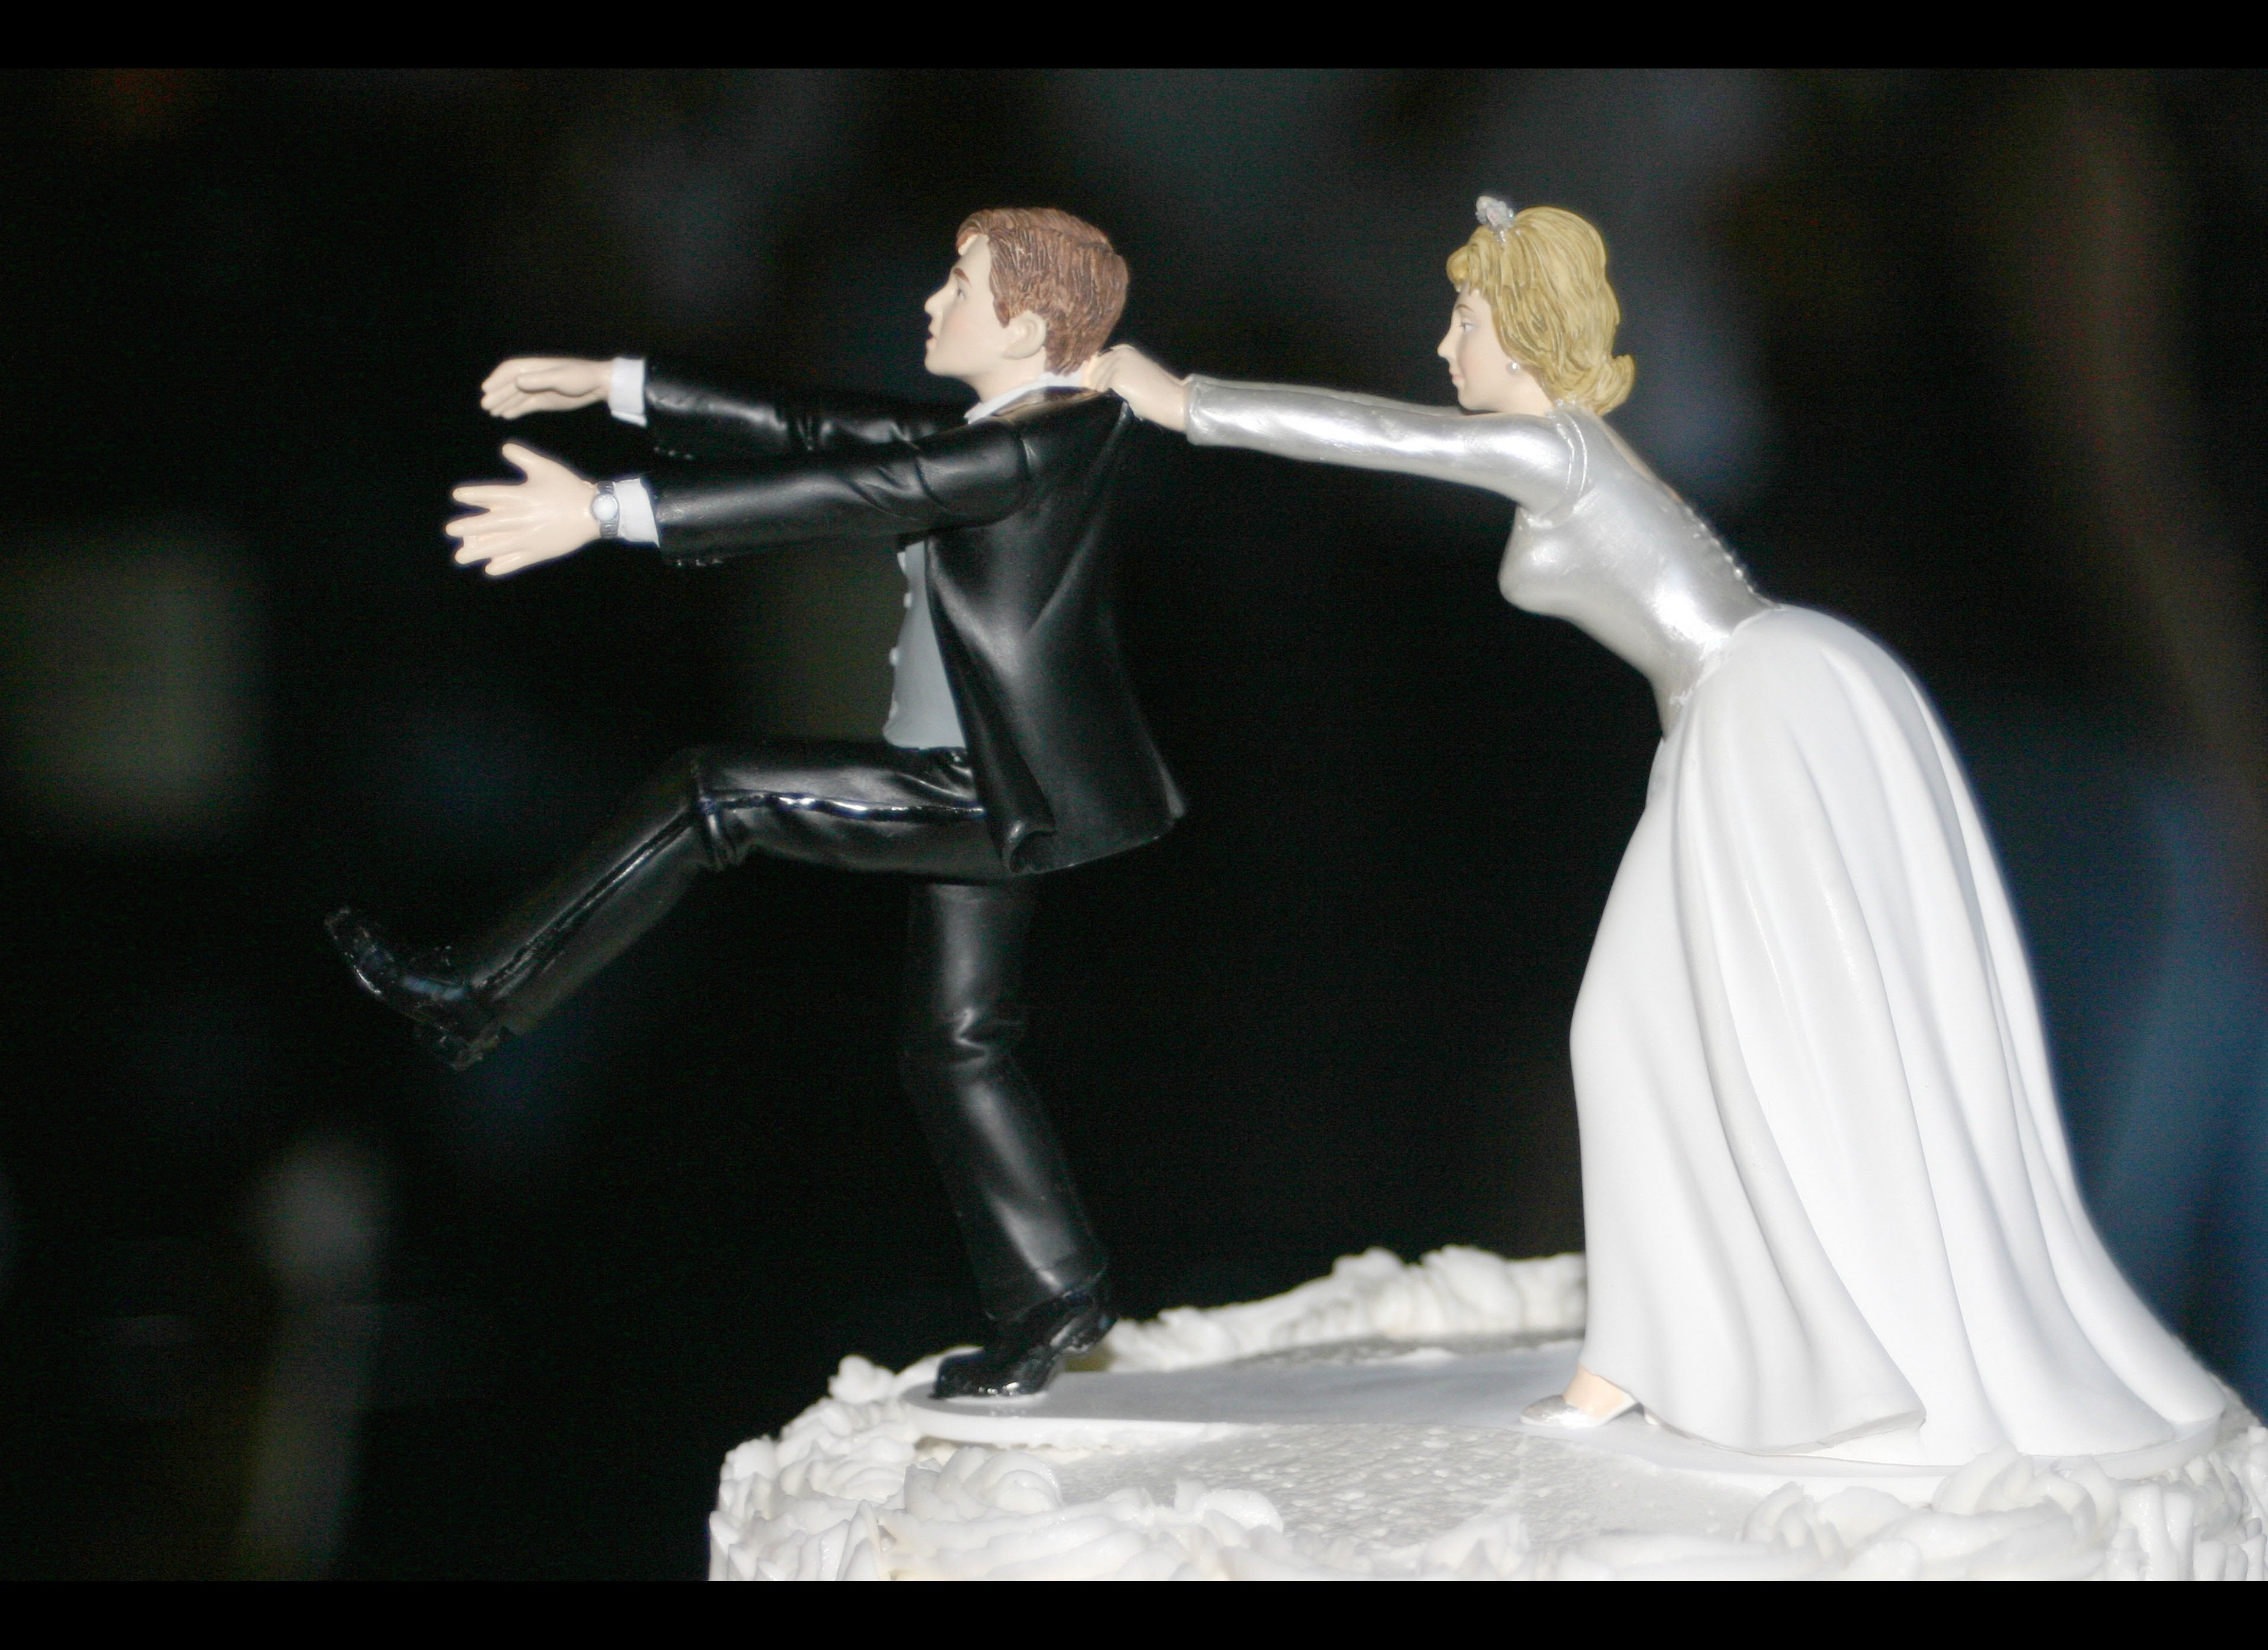 Beach wedding cake topper – Thistle and Lace Designs